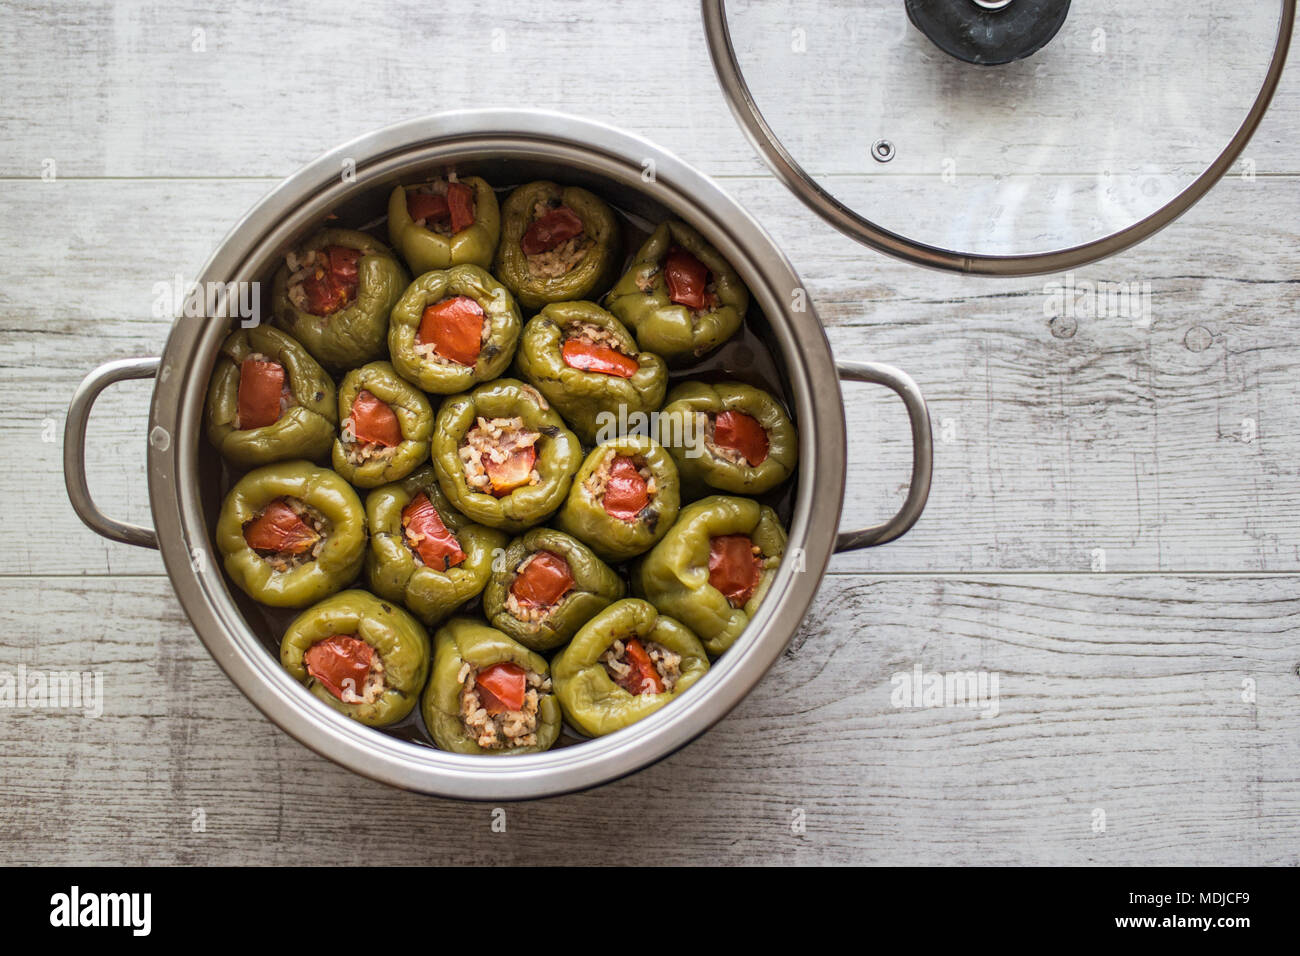 Biber Dolmasi / Turkish Stuffed Peppers in a pan on a white wooden surface. Stock Photo